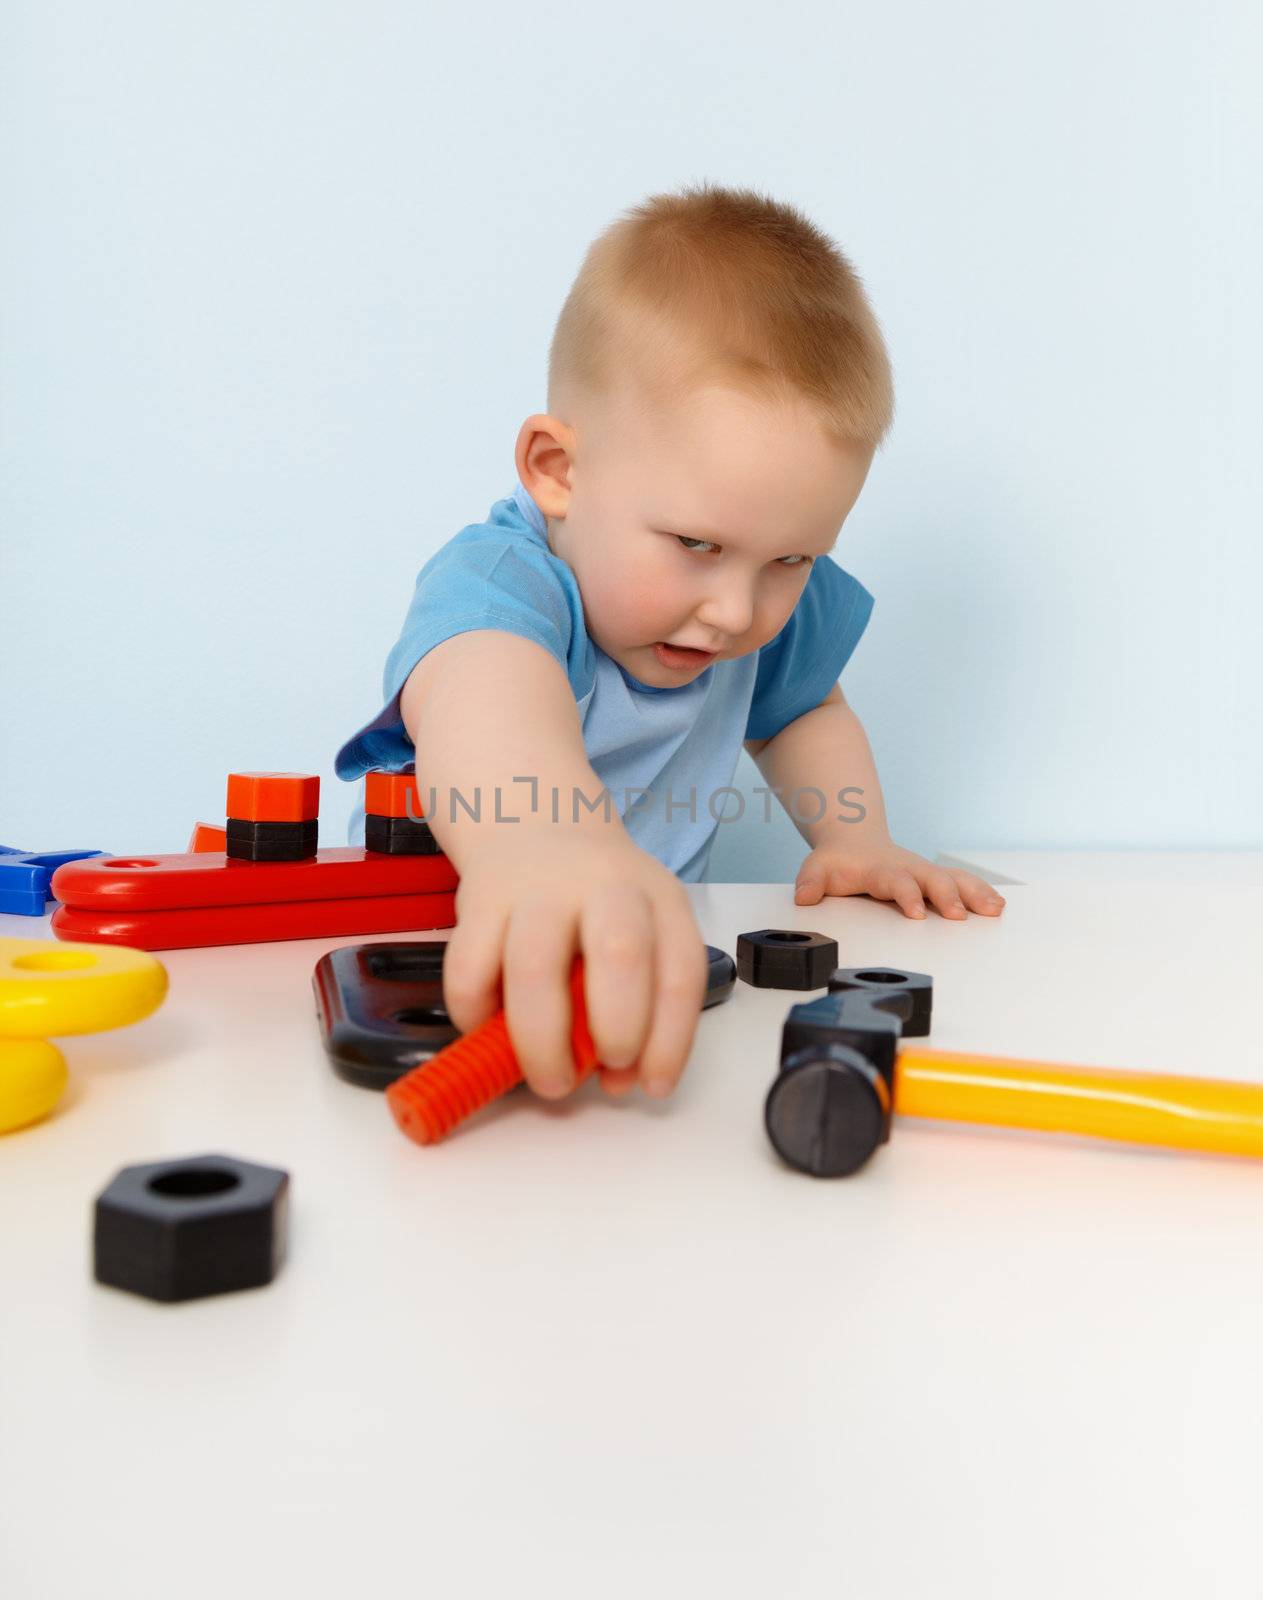 Child playing with a toy plastic constructor by pzaxe